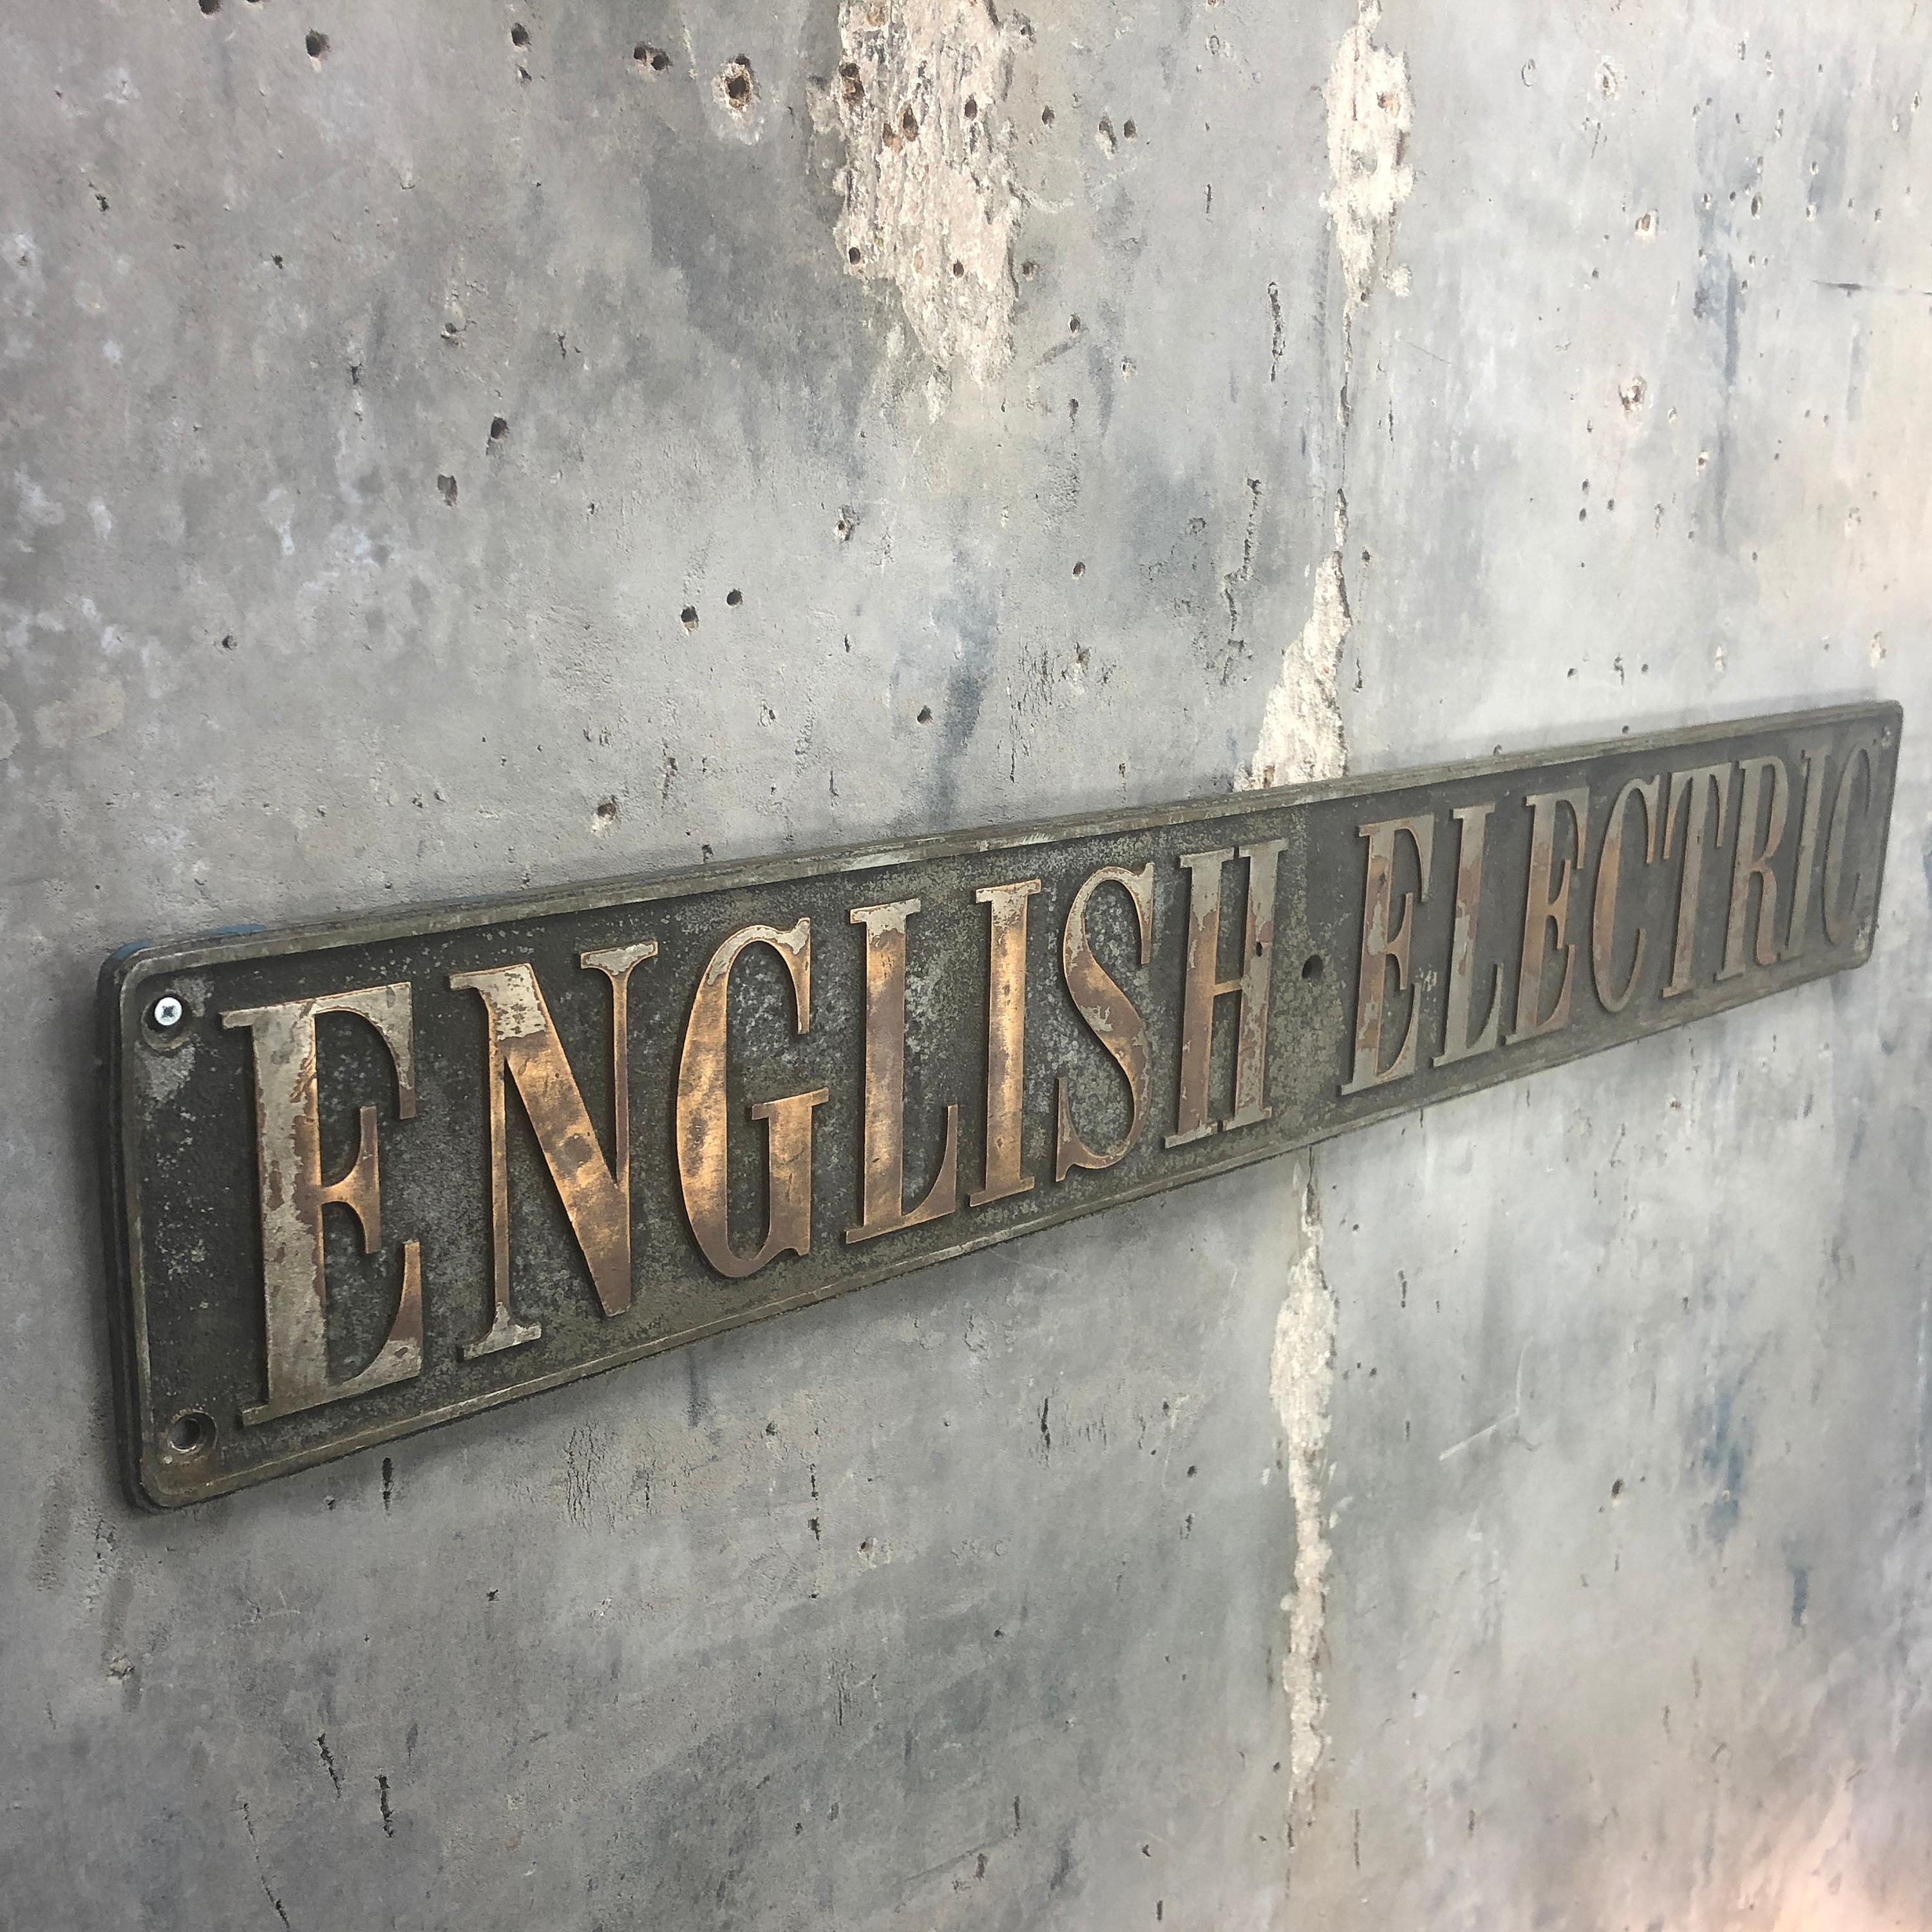 Industrial 1920s English Electric Locomotive Engine Plate